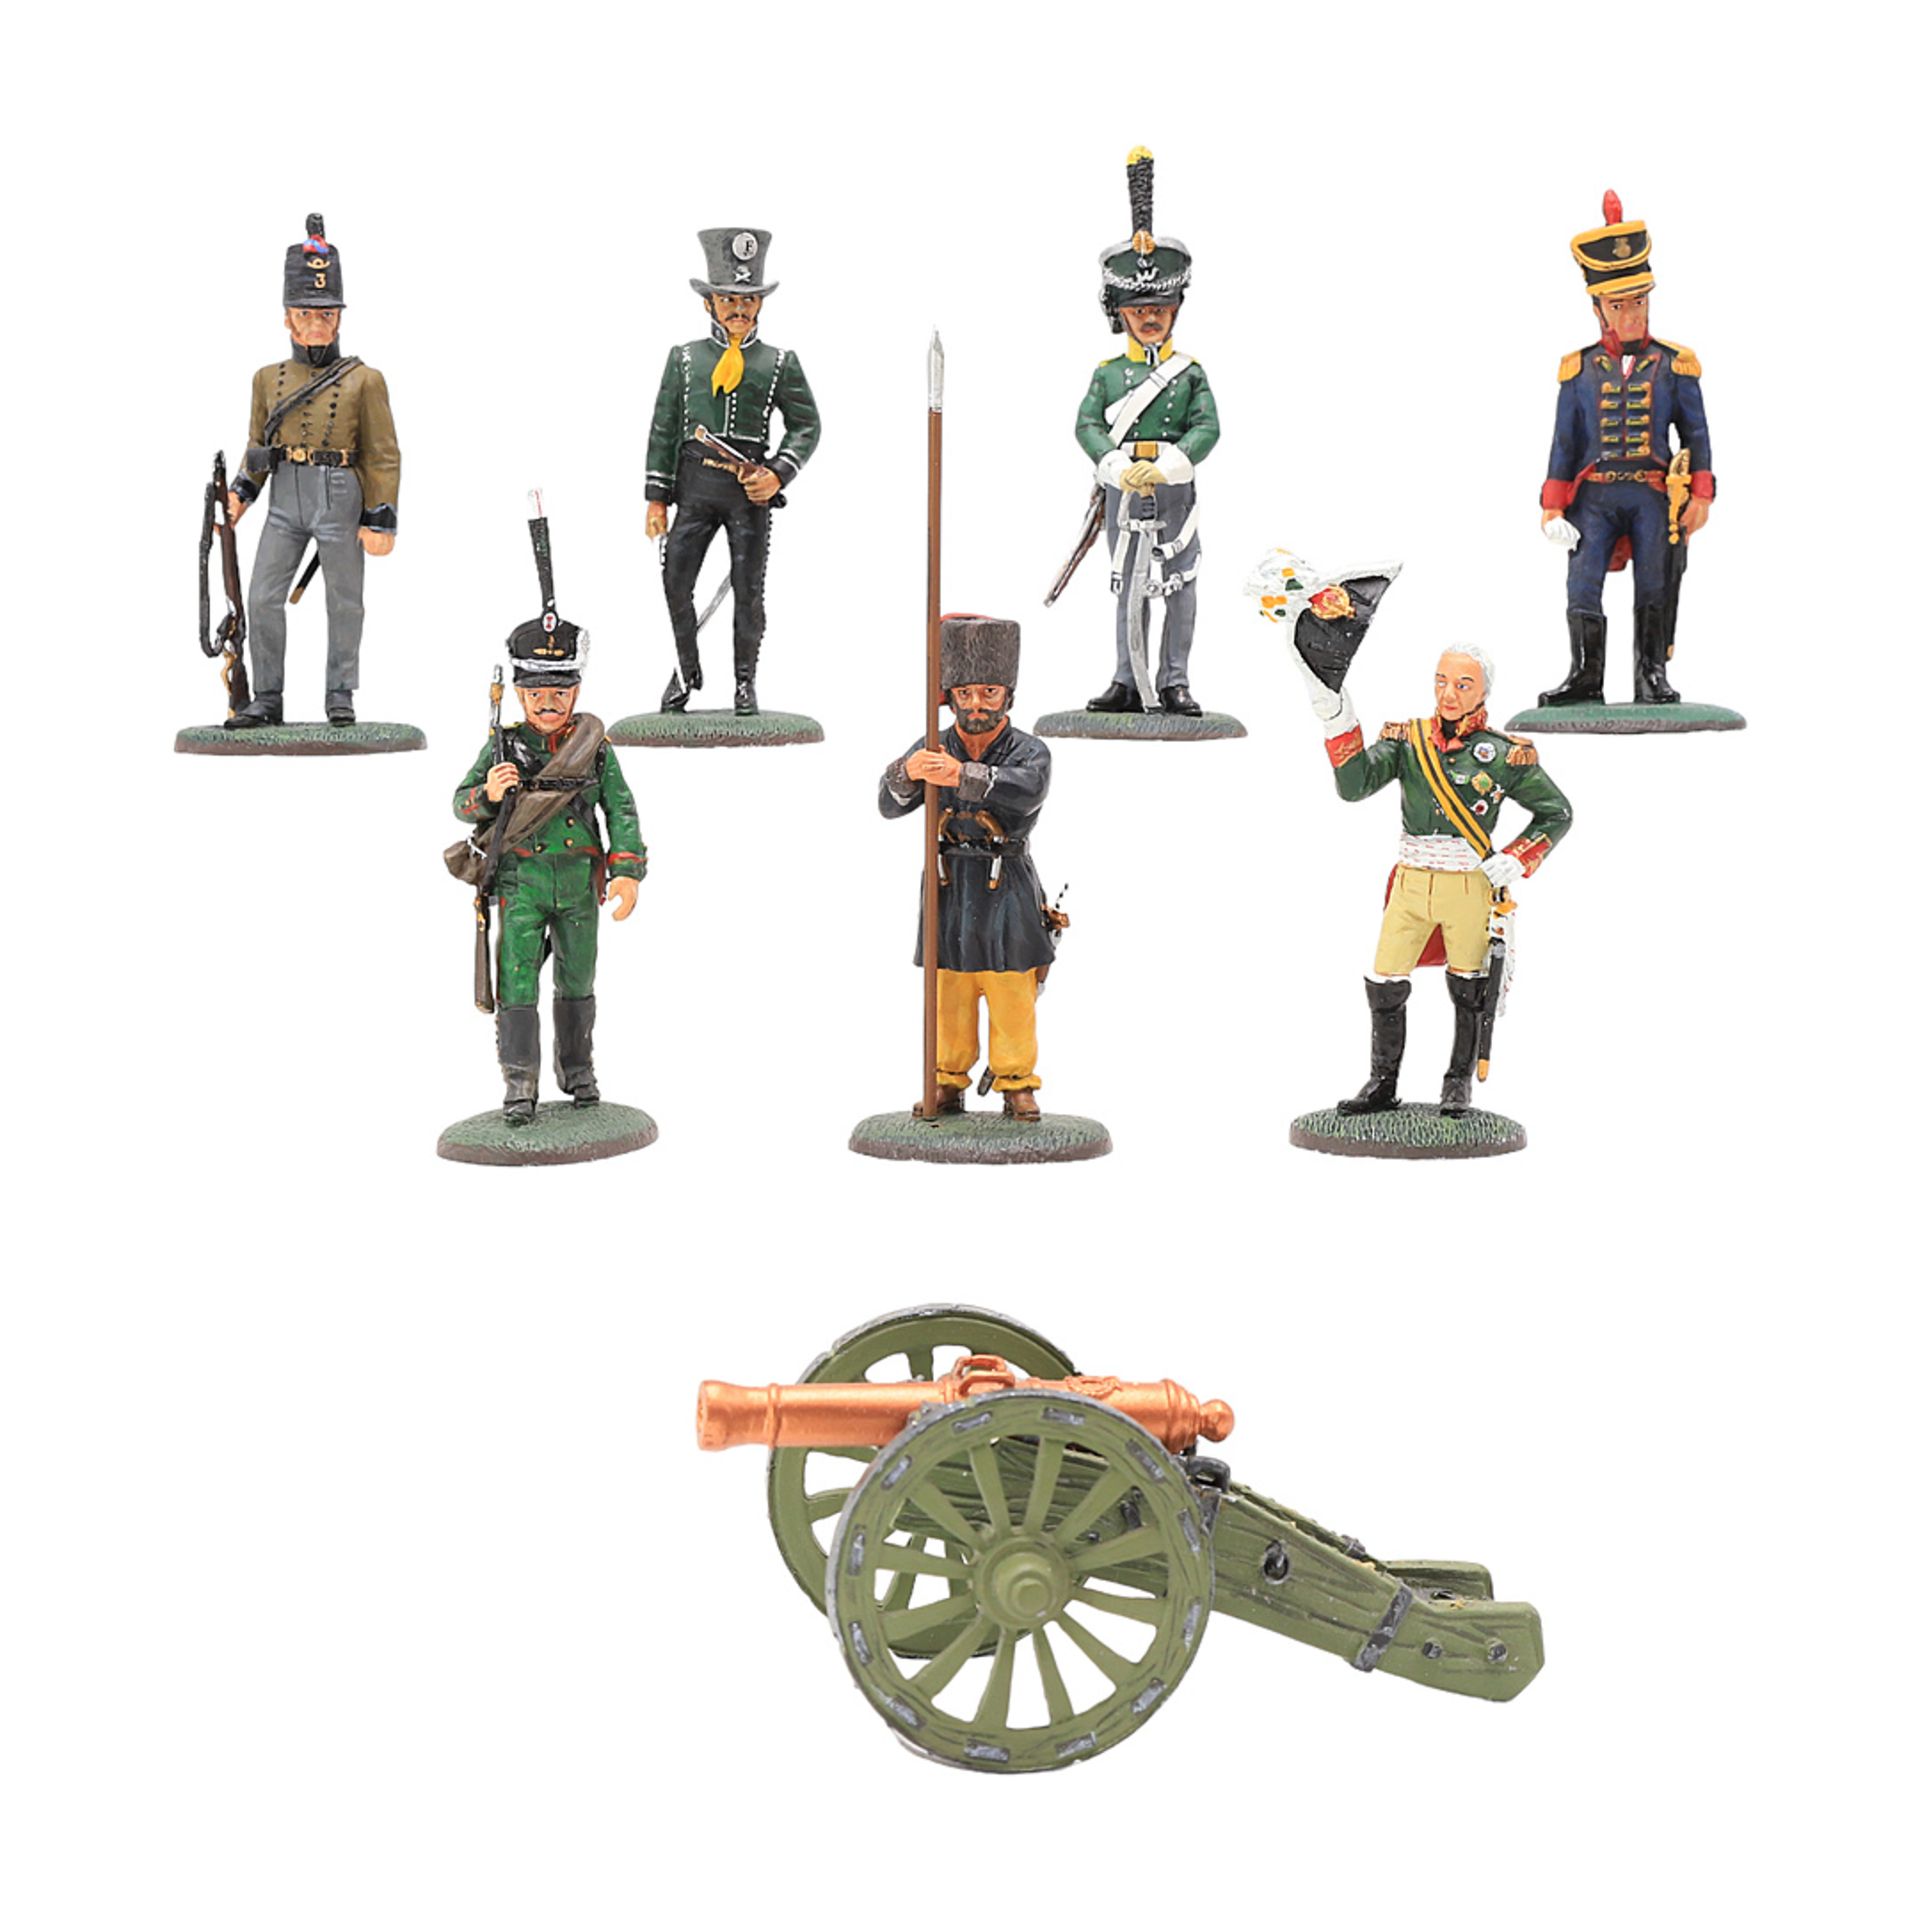 20 miniature figures of Allied soldiers and cannon, wars of liberation / battle of nations - Image 3 of 4